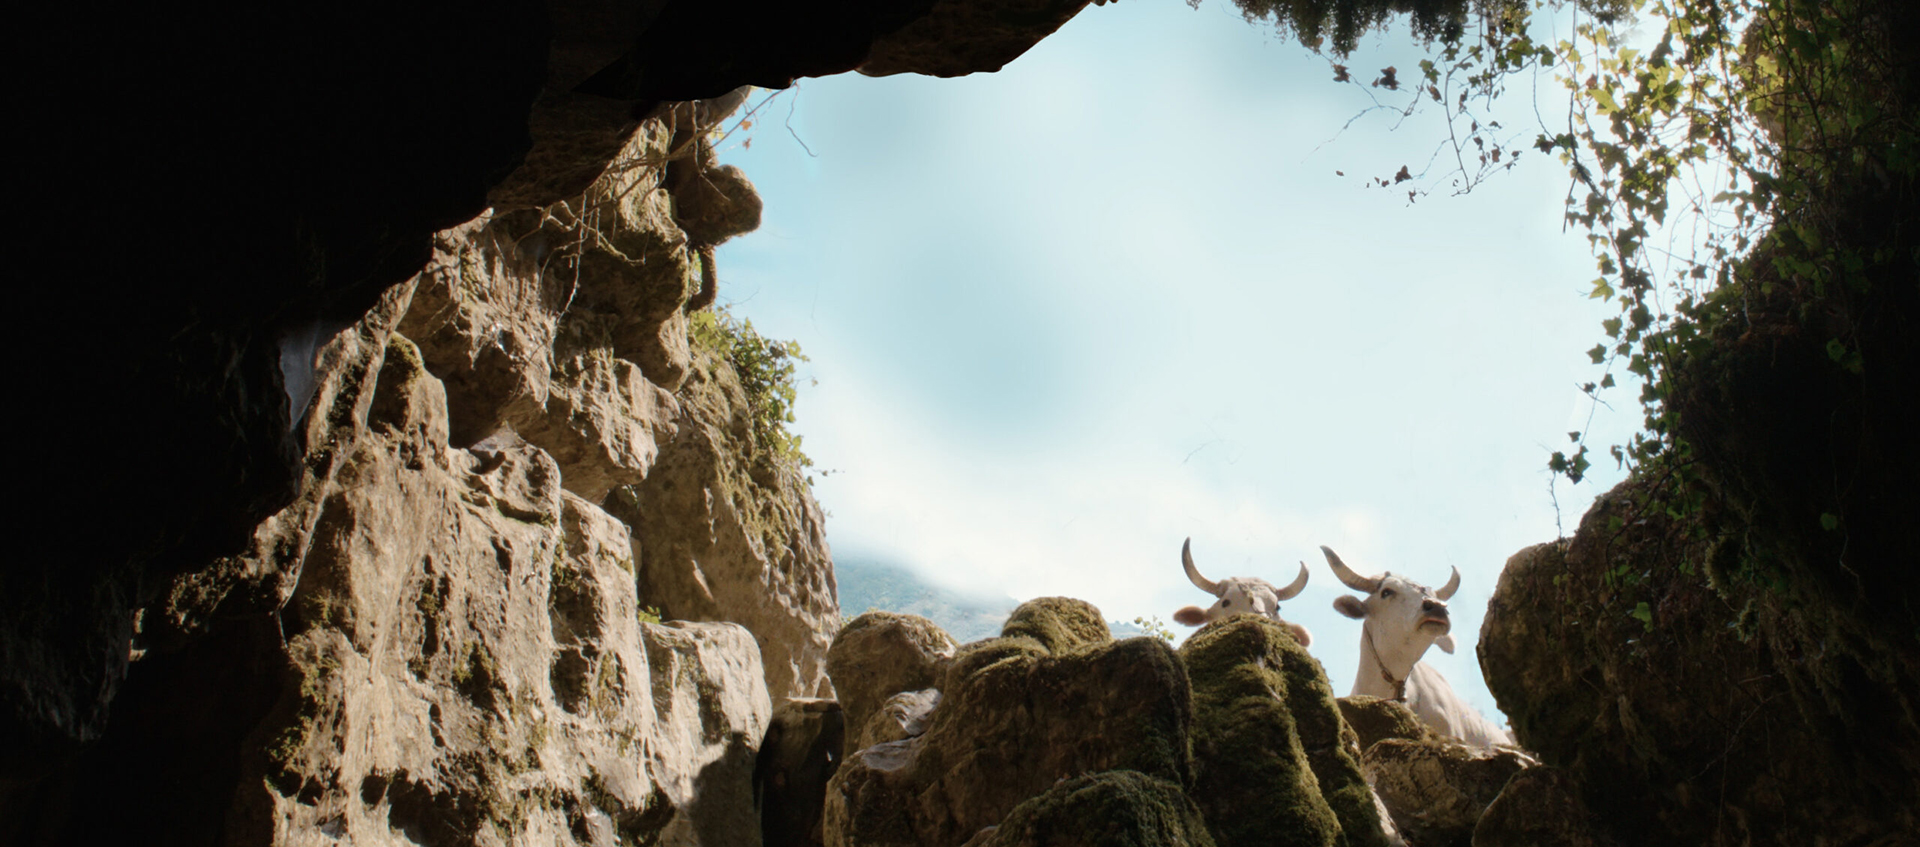 Two white, horned mountain goats peering over moss-covered rock at the opening of a cave. There is foliage hanging down from the top of the cave on the right, and the background is a bright blue sky with a rocky mountain on the left.